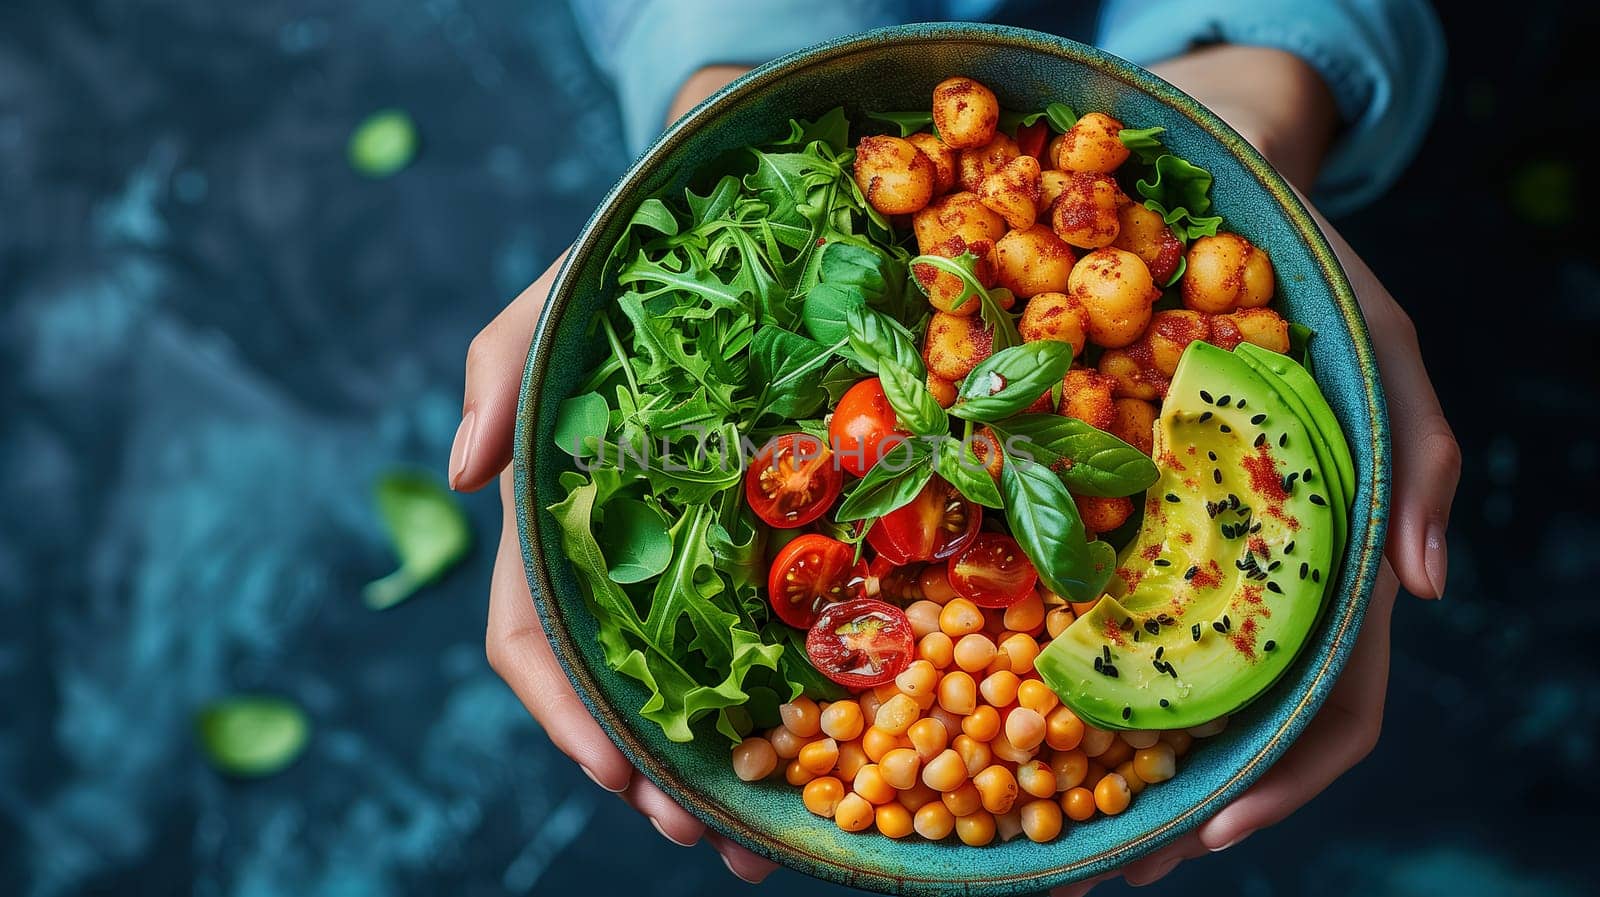 A person is holding a bowl filled with food, featuring avocado slices and chickpeas. The bowl is being held at waist level, showcasing a vibrant and nutritious meal.